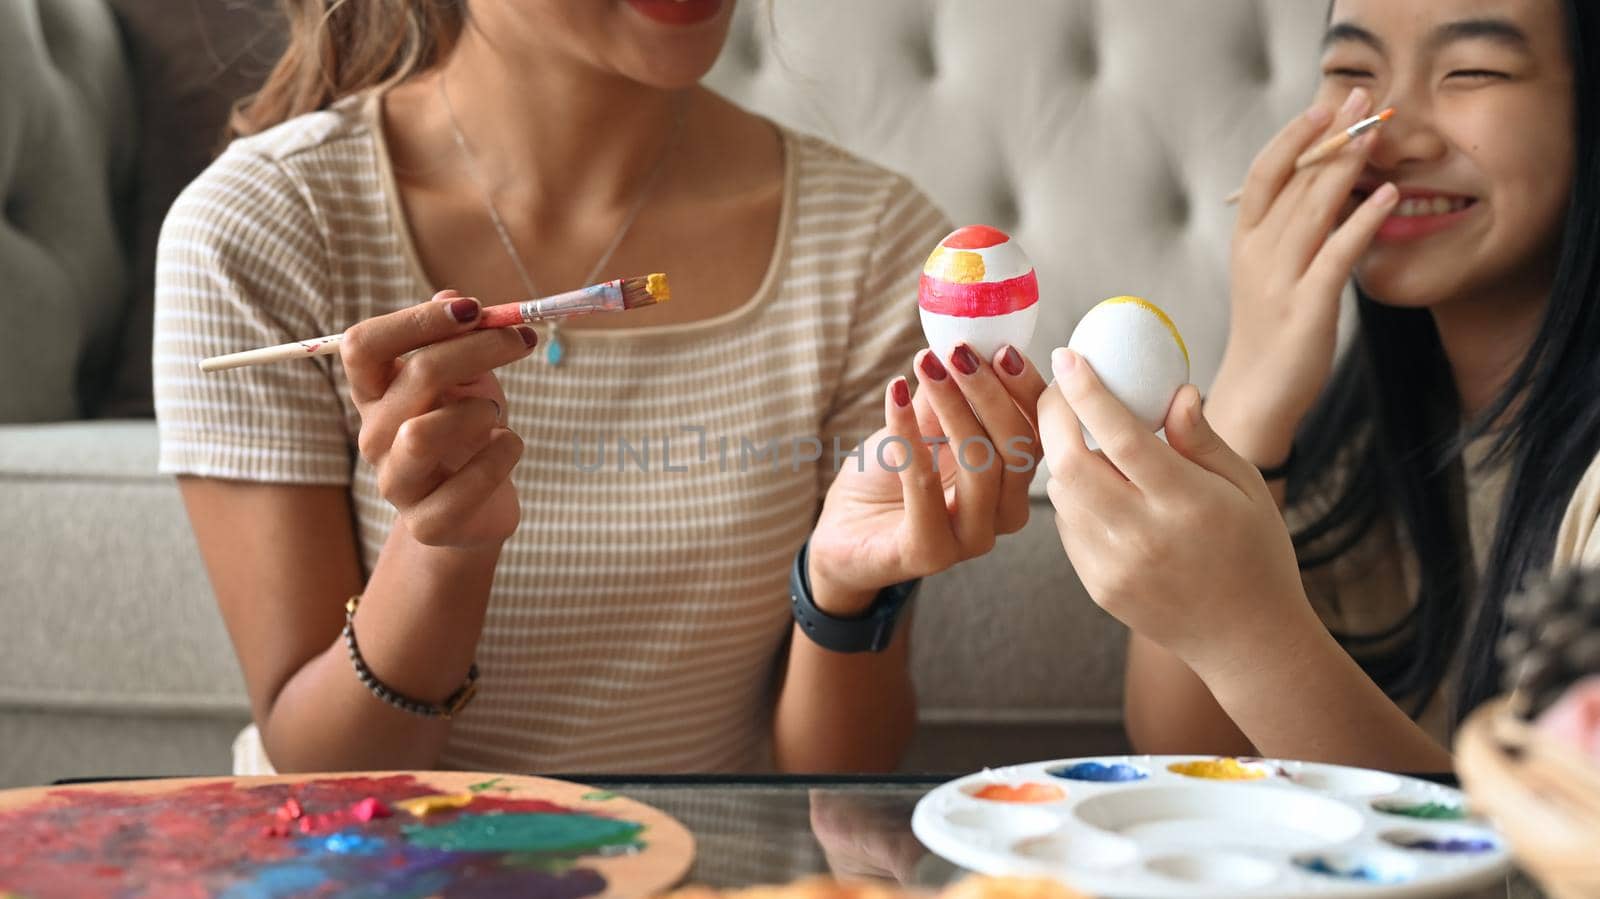 Cheerful Asian girl painting Easter eggs while enjoying decorating with mother. Easter holidays and people concept.